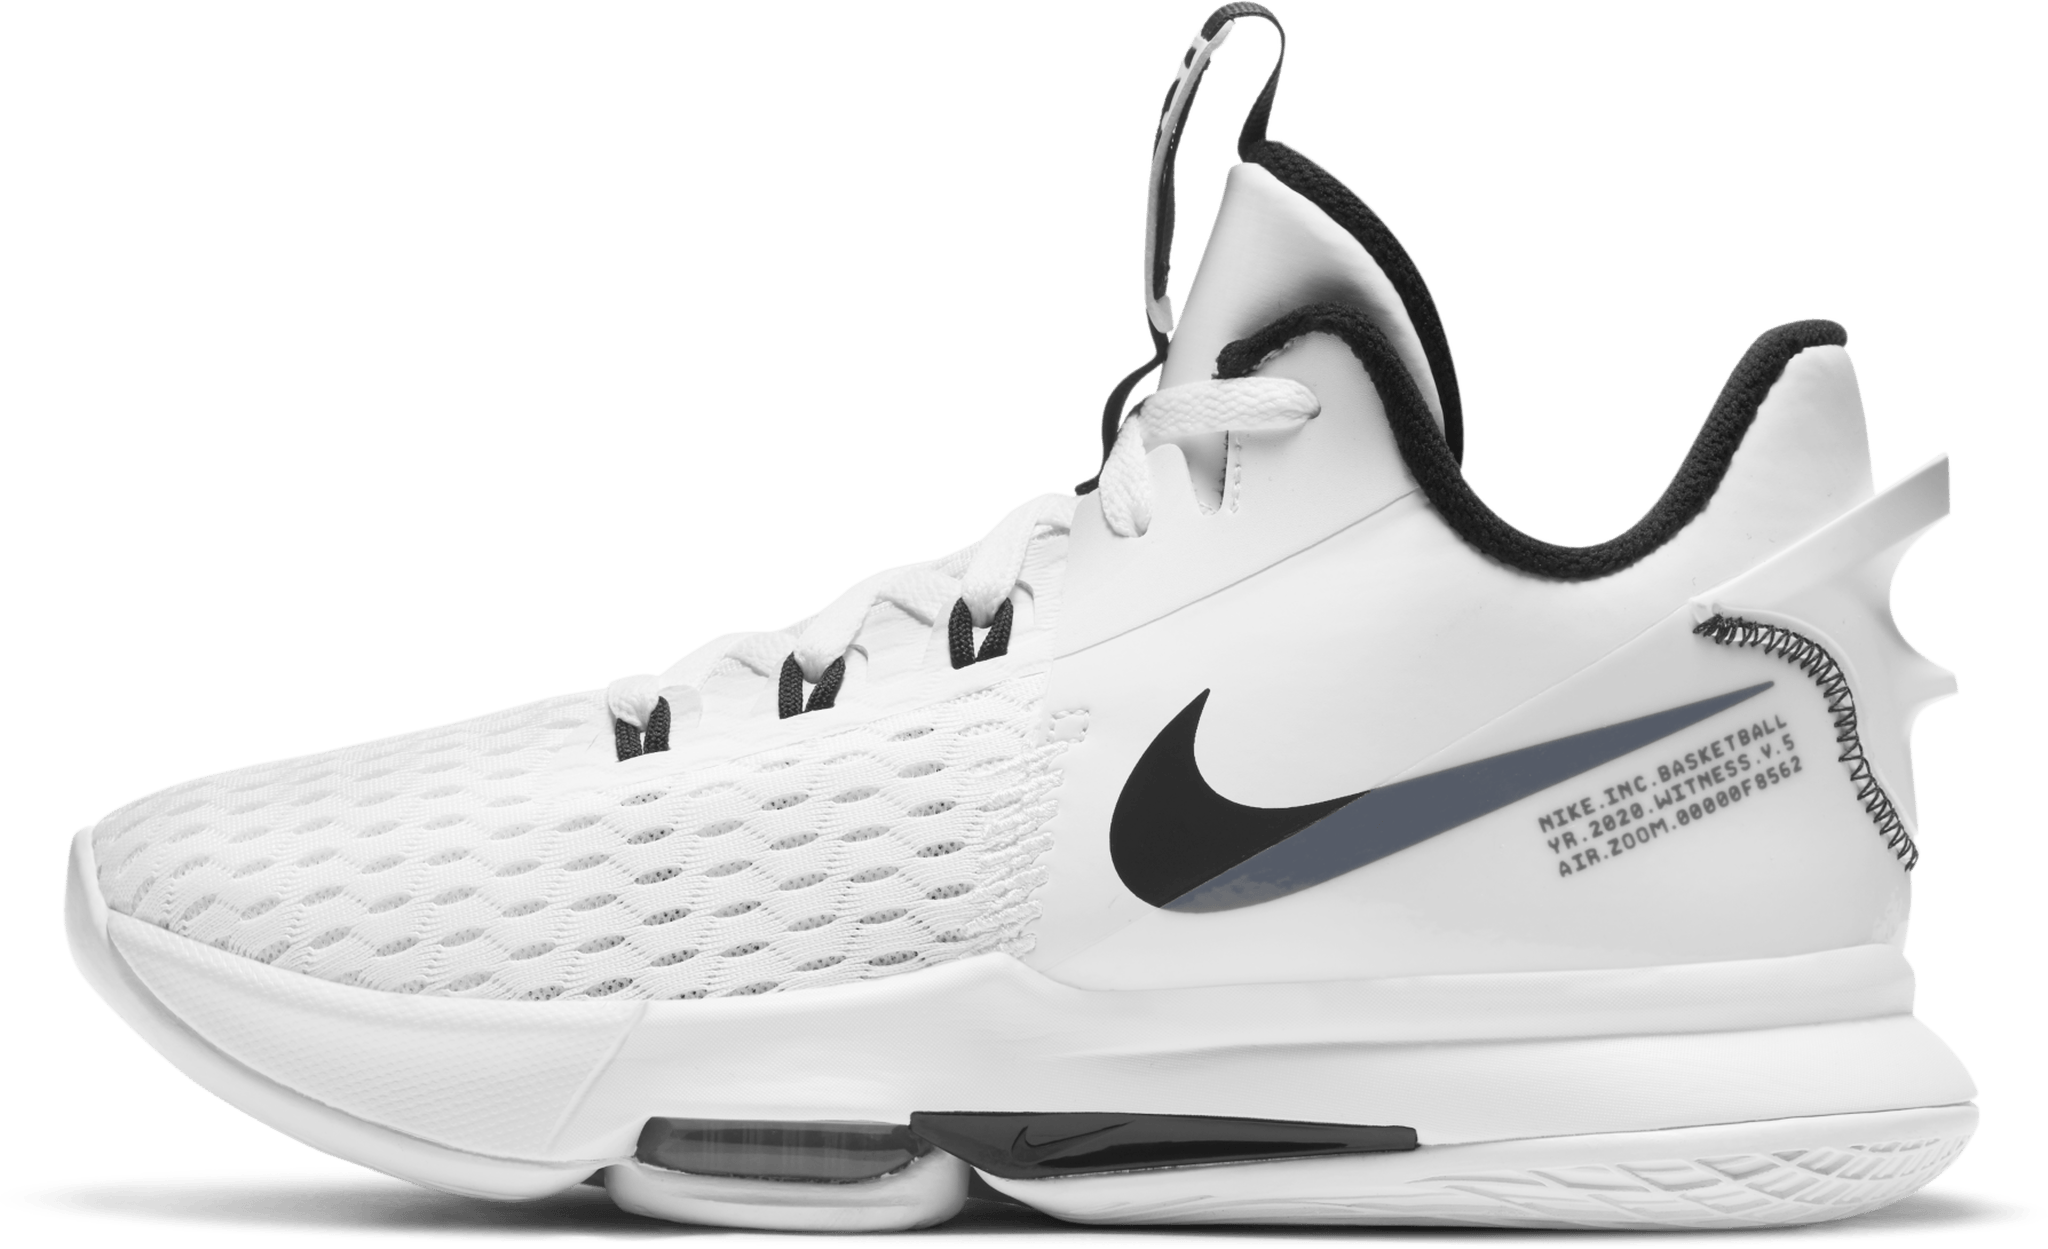 Nike Lebron Witness 5 - Review, Deals, Pics of 15 Colorways